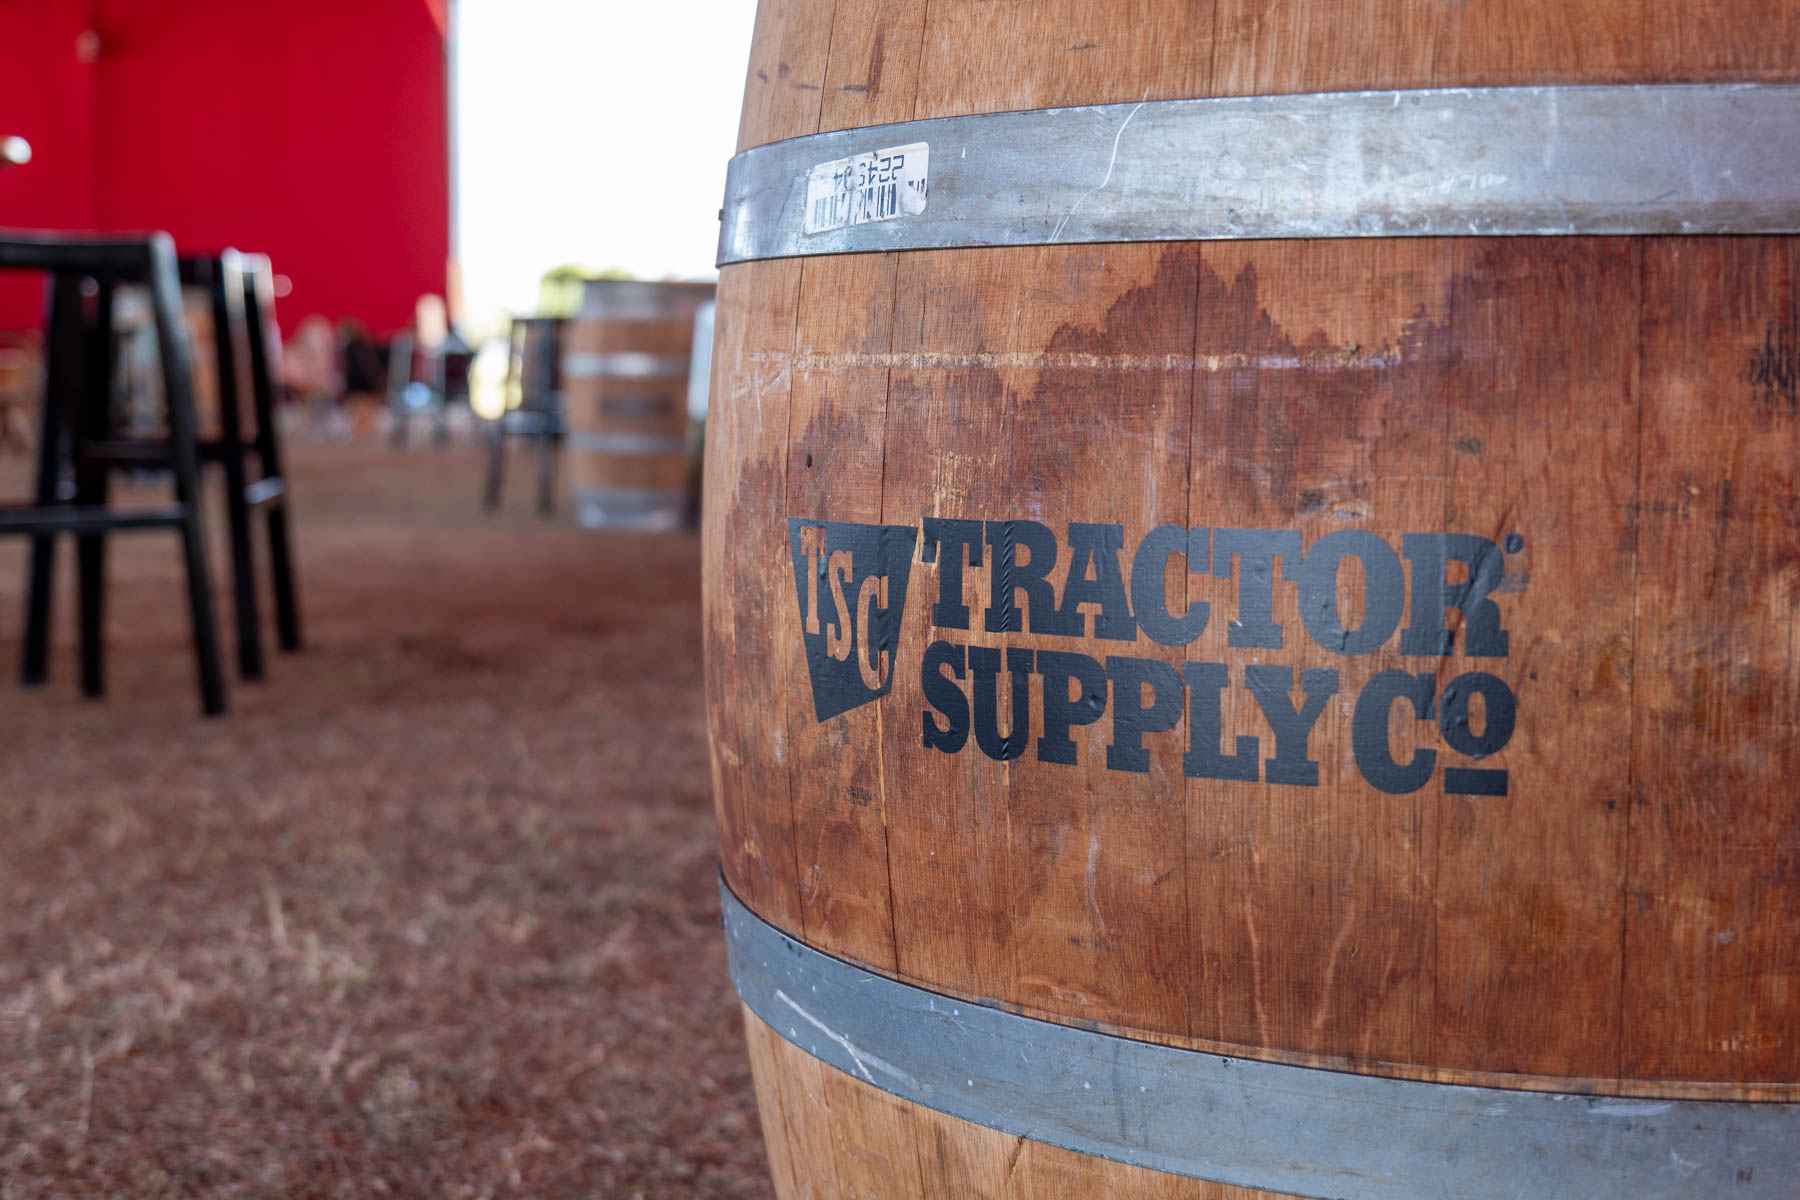 A close-up of a barrel branded with the Tractor Supply Co logo.